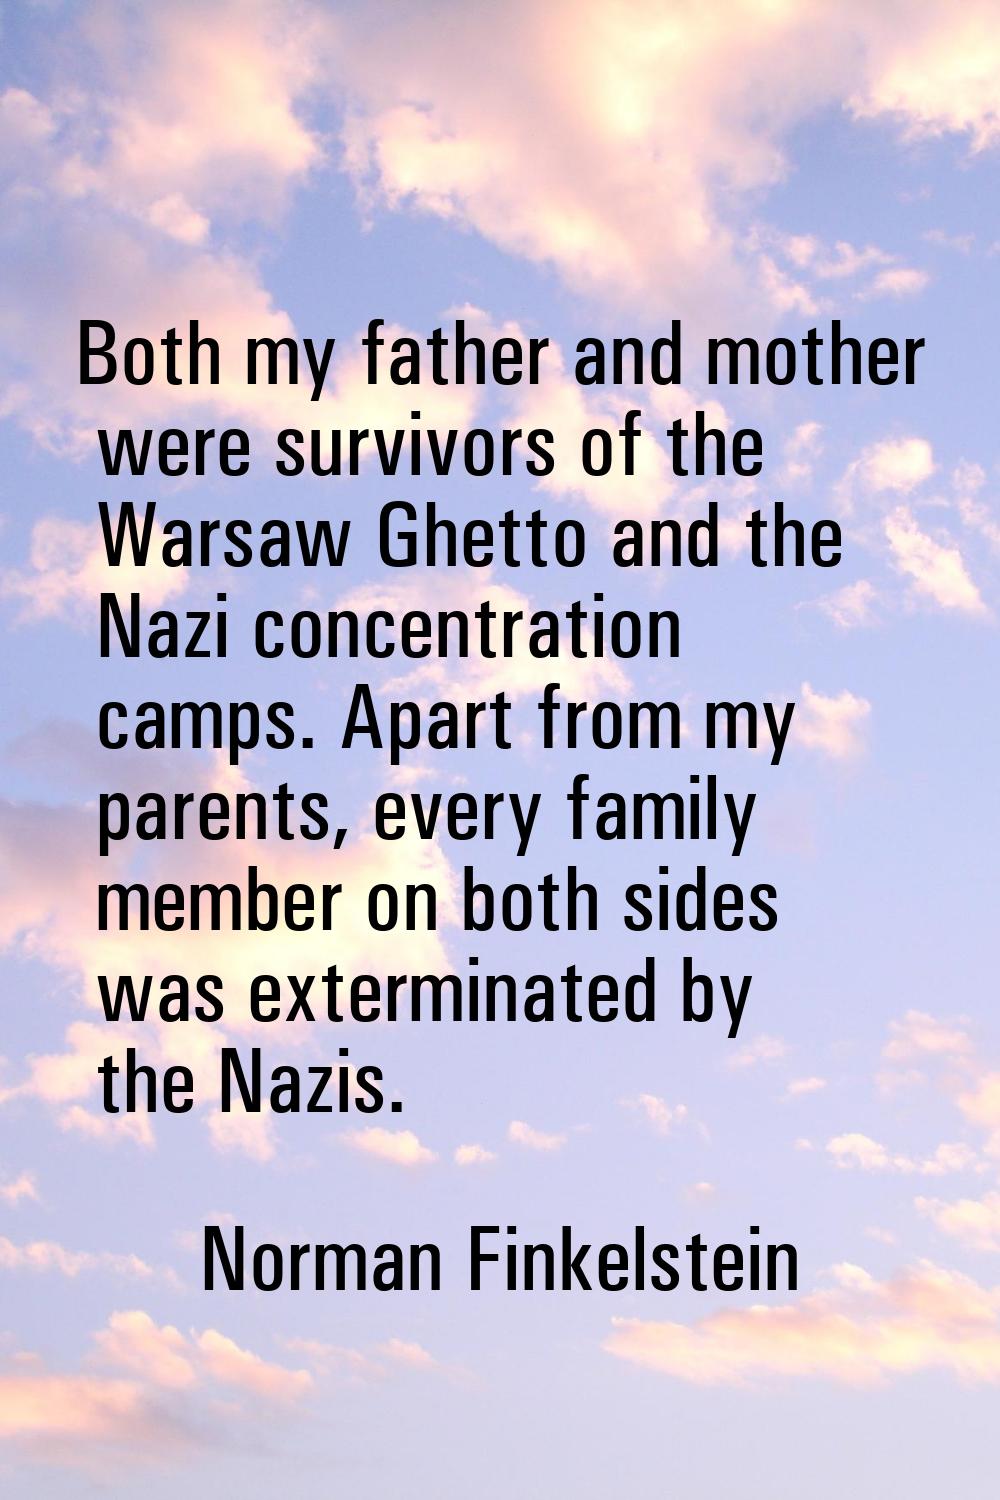 Both my father and mother were survivors of the Warsaw Ghetto and the Nazi concentration camps. Apa